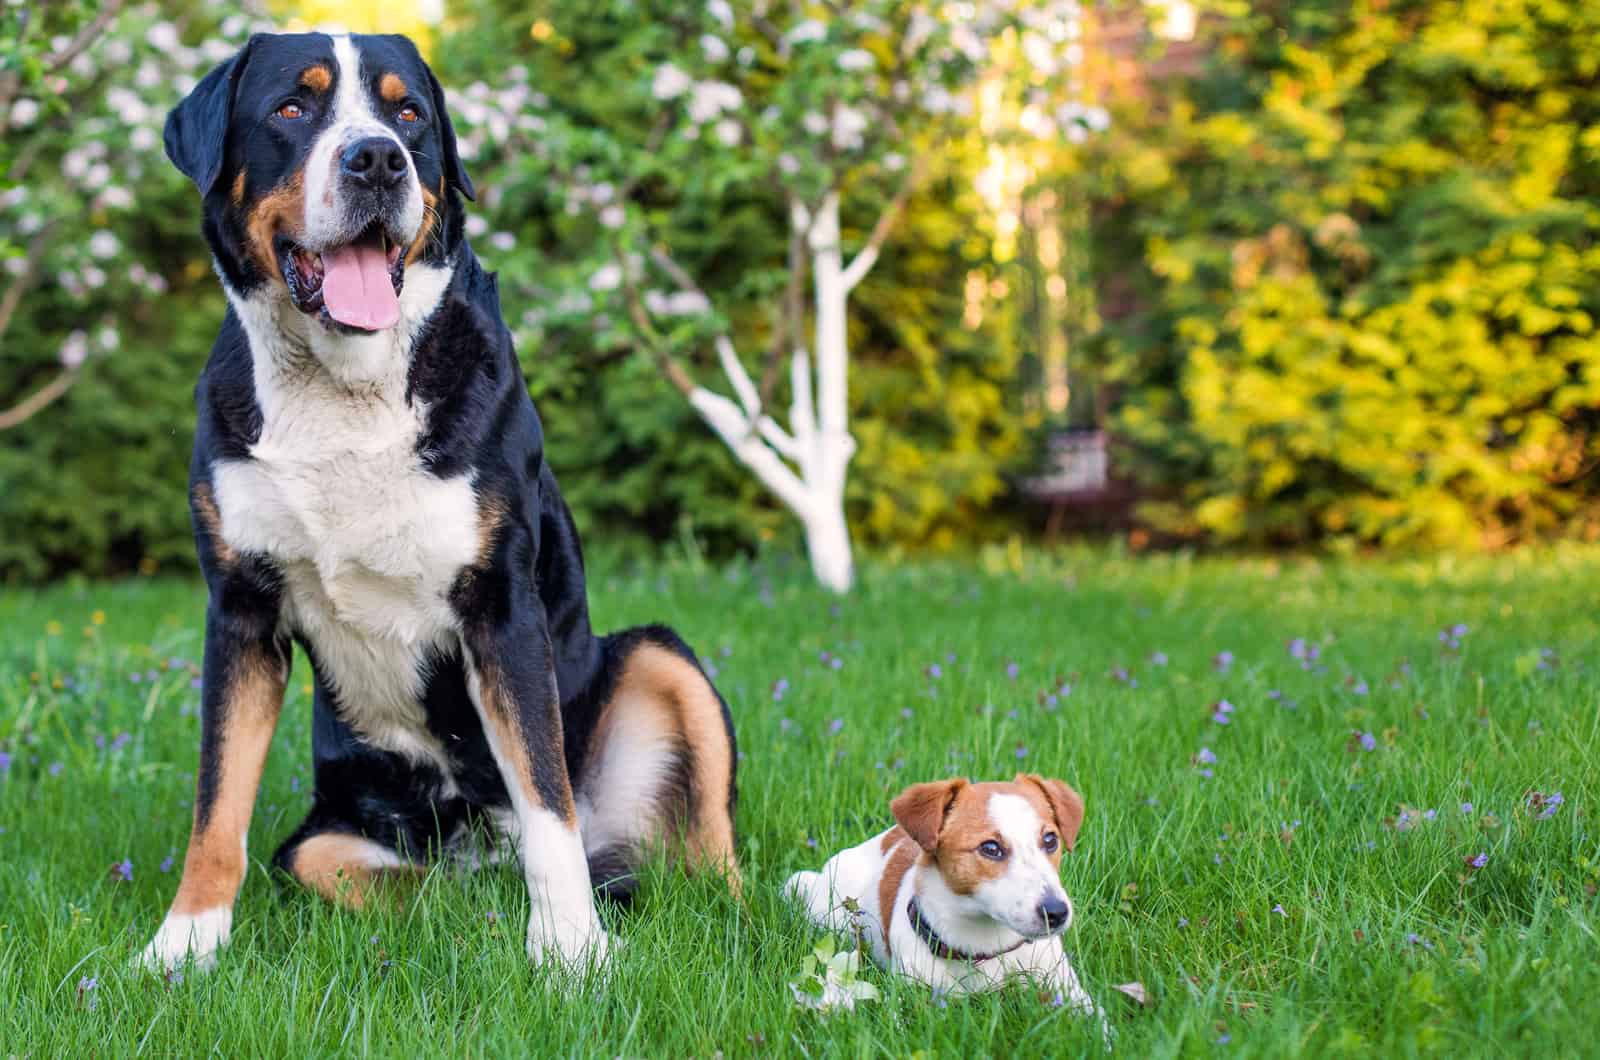 Great Swiss Mountain Dog and Little Jack Russell on the grass